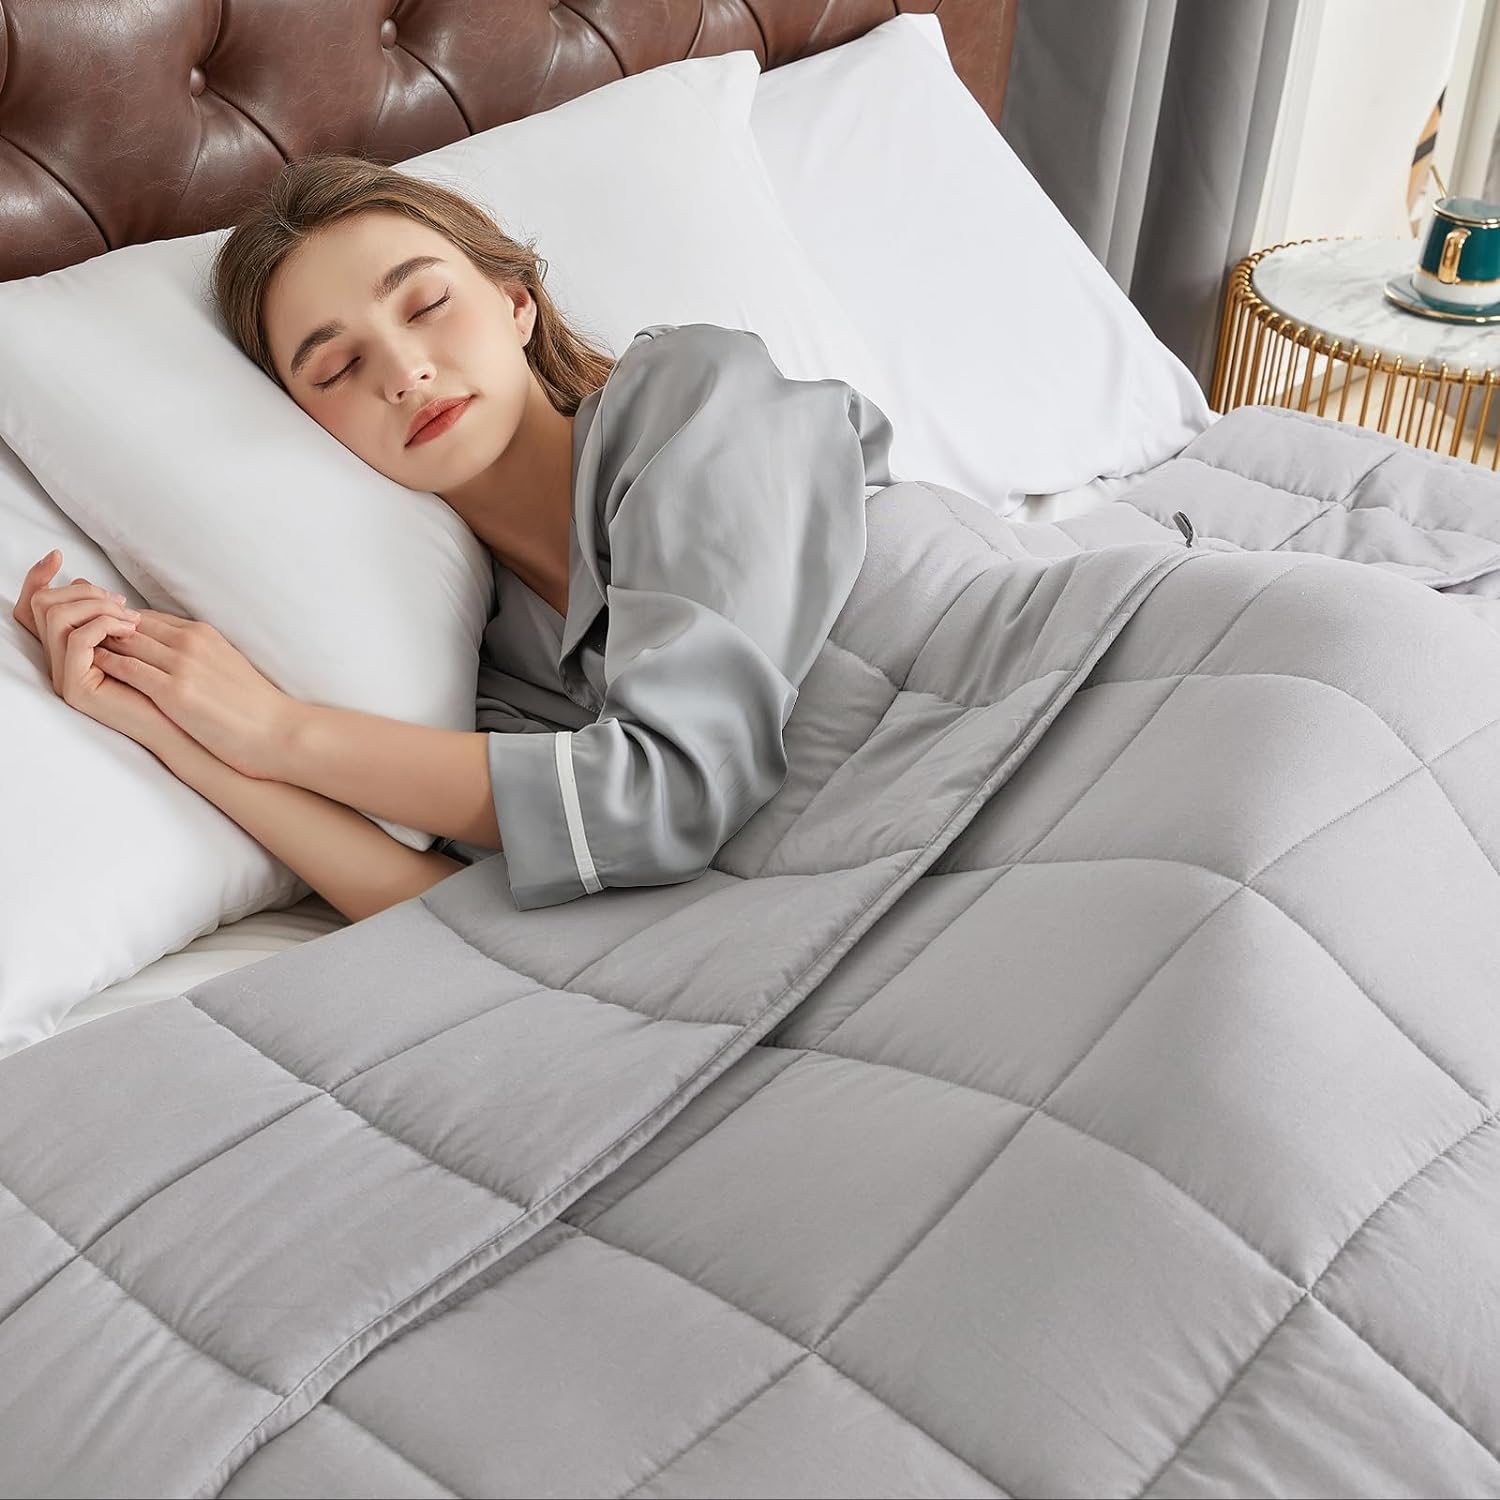 I recently purchased the CYMULA Weighted Blanket in the Queen Size Dark Grey variant, weighing 15lbs, and it has quickly become an essential part of my relaxation routine. As someone who weighs around 150 lbs, this blankets weight range of 140-180 lbs suits me perfectly.First and foremost, I was impressed by the blankets exceptional build quality. The stitching is sturdy, and the blanket feels incredibly soft and luxurious against the skin. The dark grey color adds a touch of elegance to my be